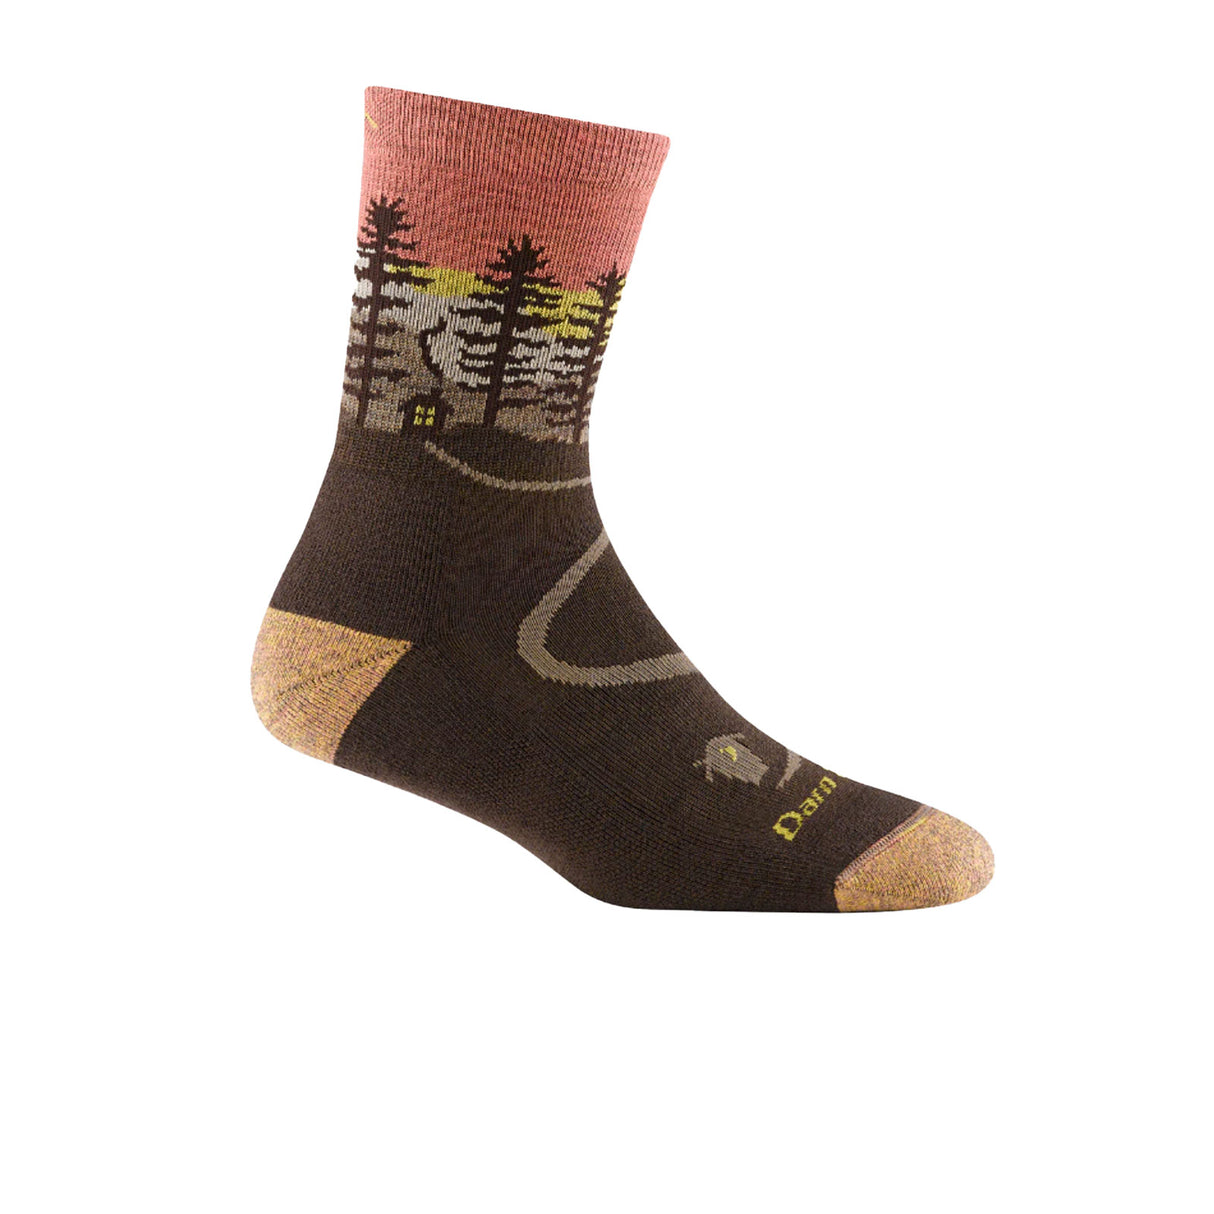 Darn Tough Northwoods Midweight Micro Crew Sock with Cushion (Women) - Earth Socks - Perf - Micro Crew - The Heel Shoe Fitters